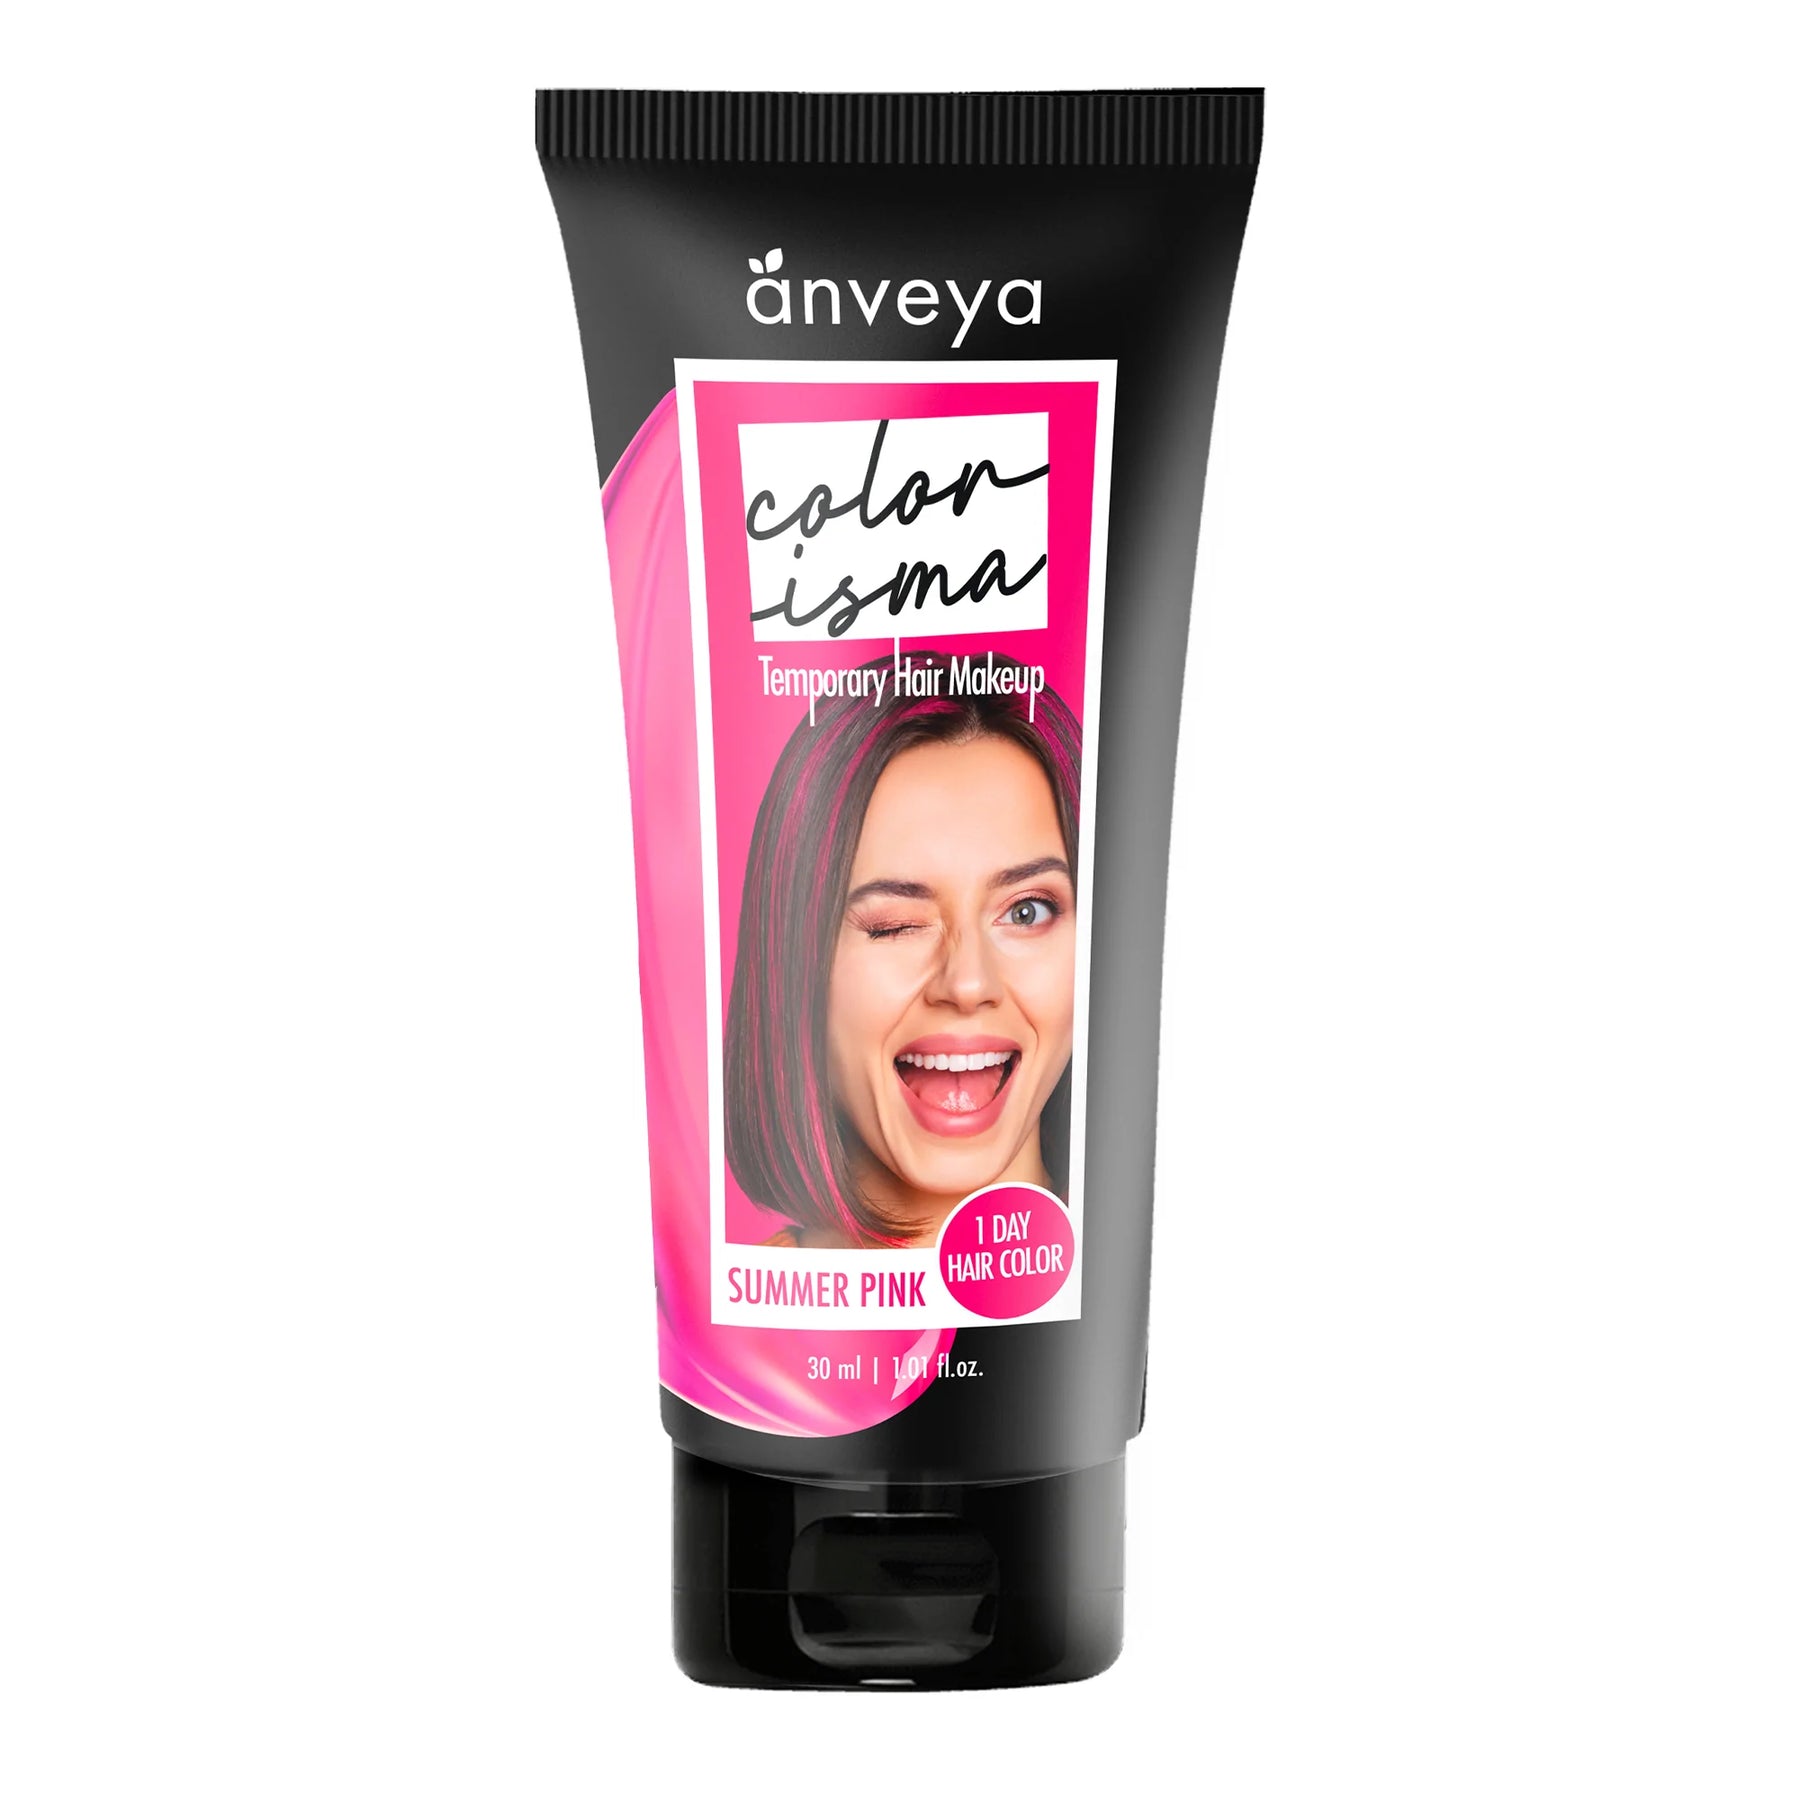 Anveya Colorisma Summer Pink One Day One Wash Temporary Hair Color, 30ml